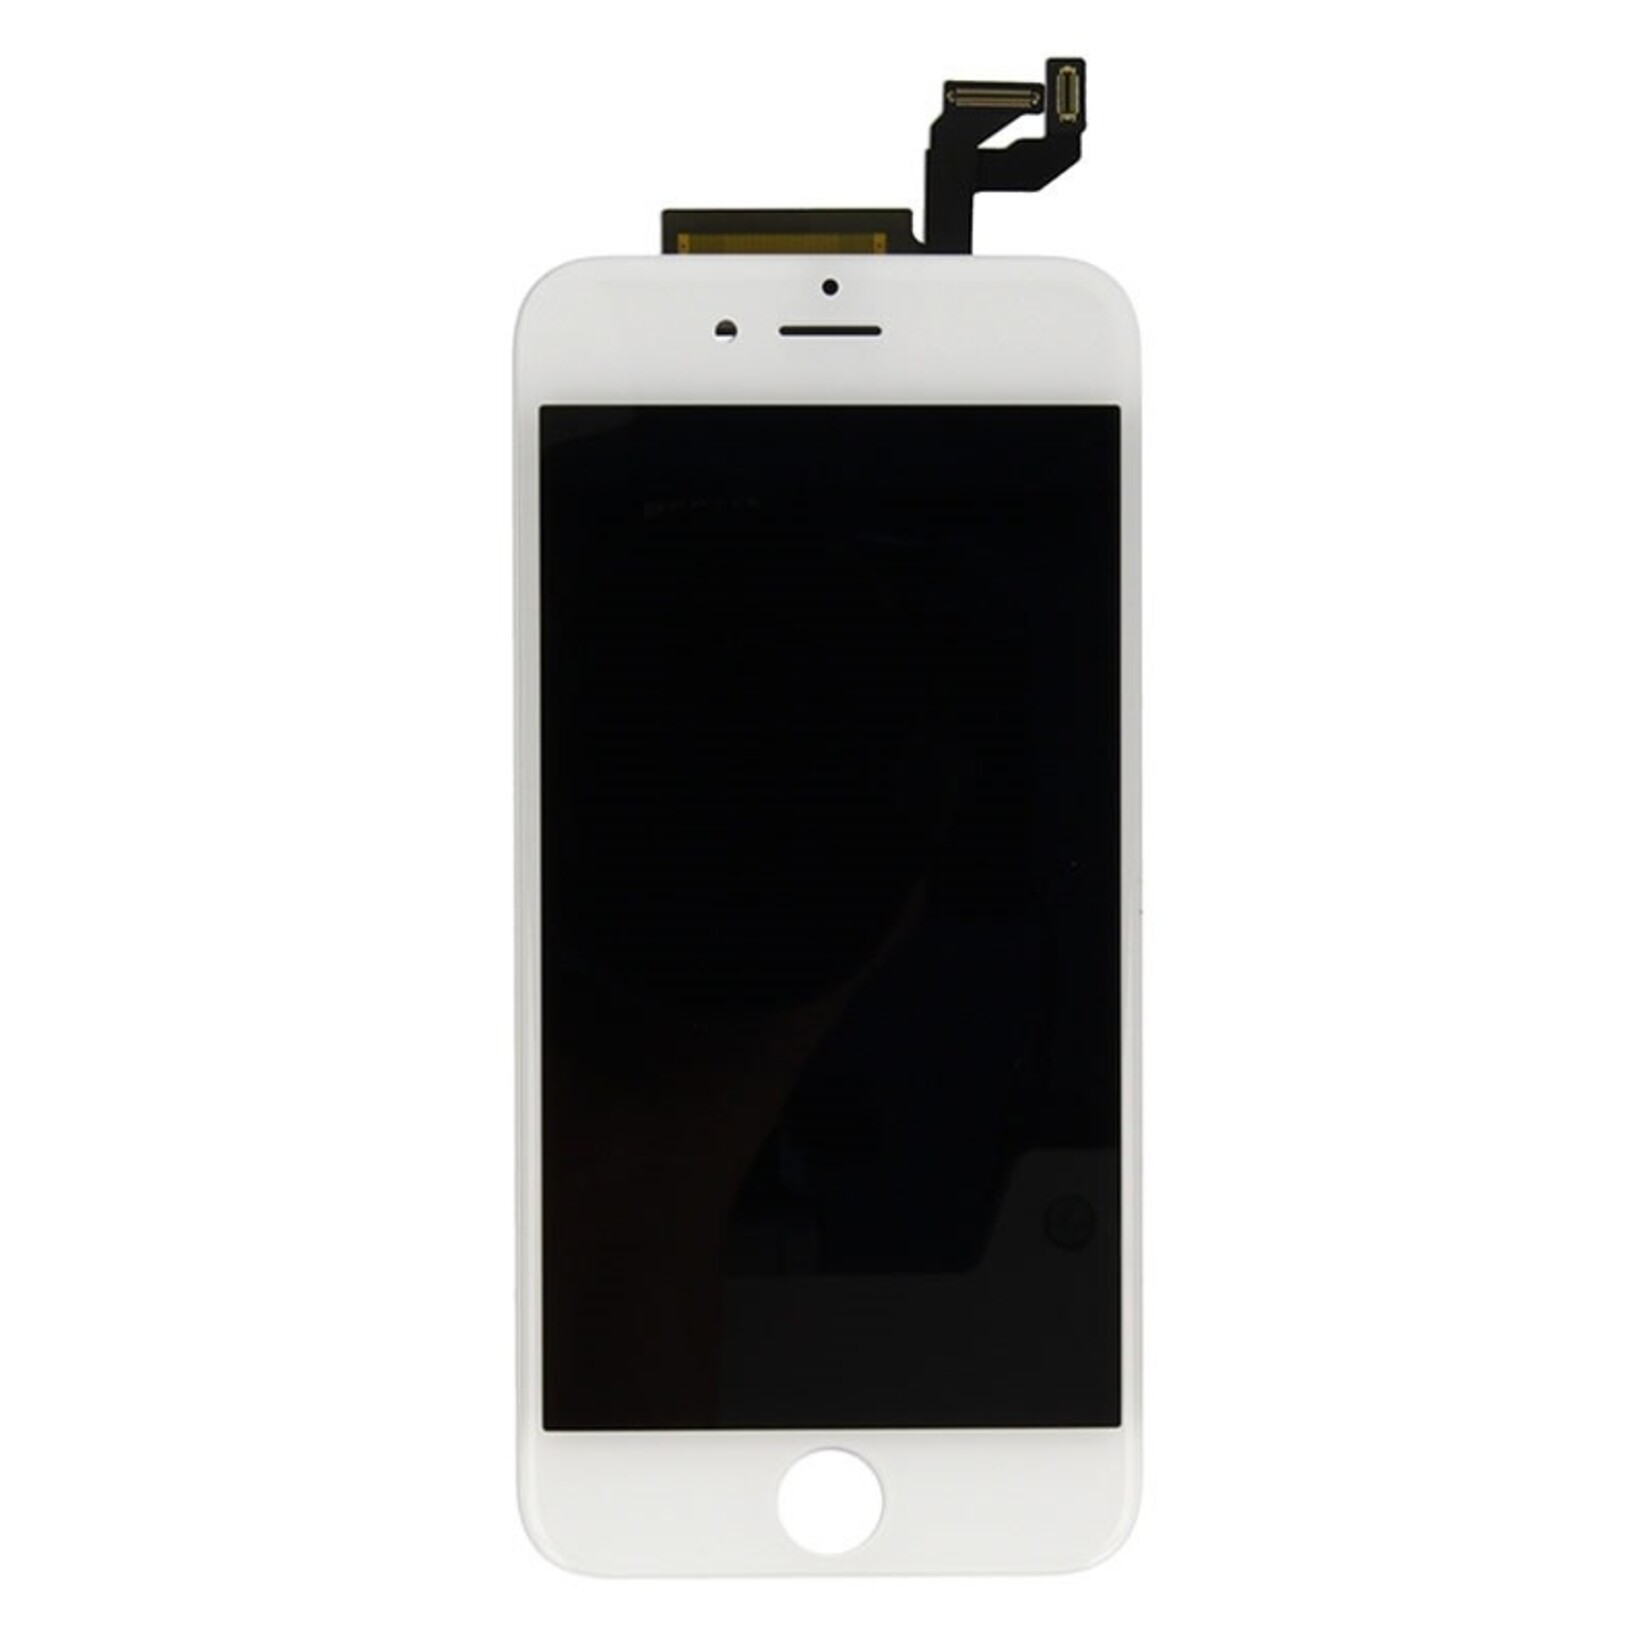 Apple USAGÉ / USED LCD DIGITIZER ASSEMBLY IPHONE 6S BLANC WHITE